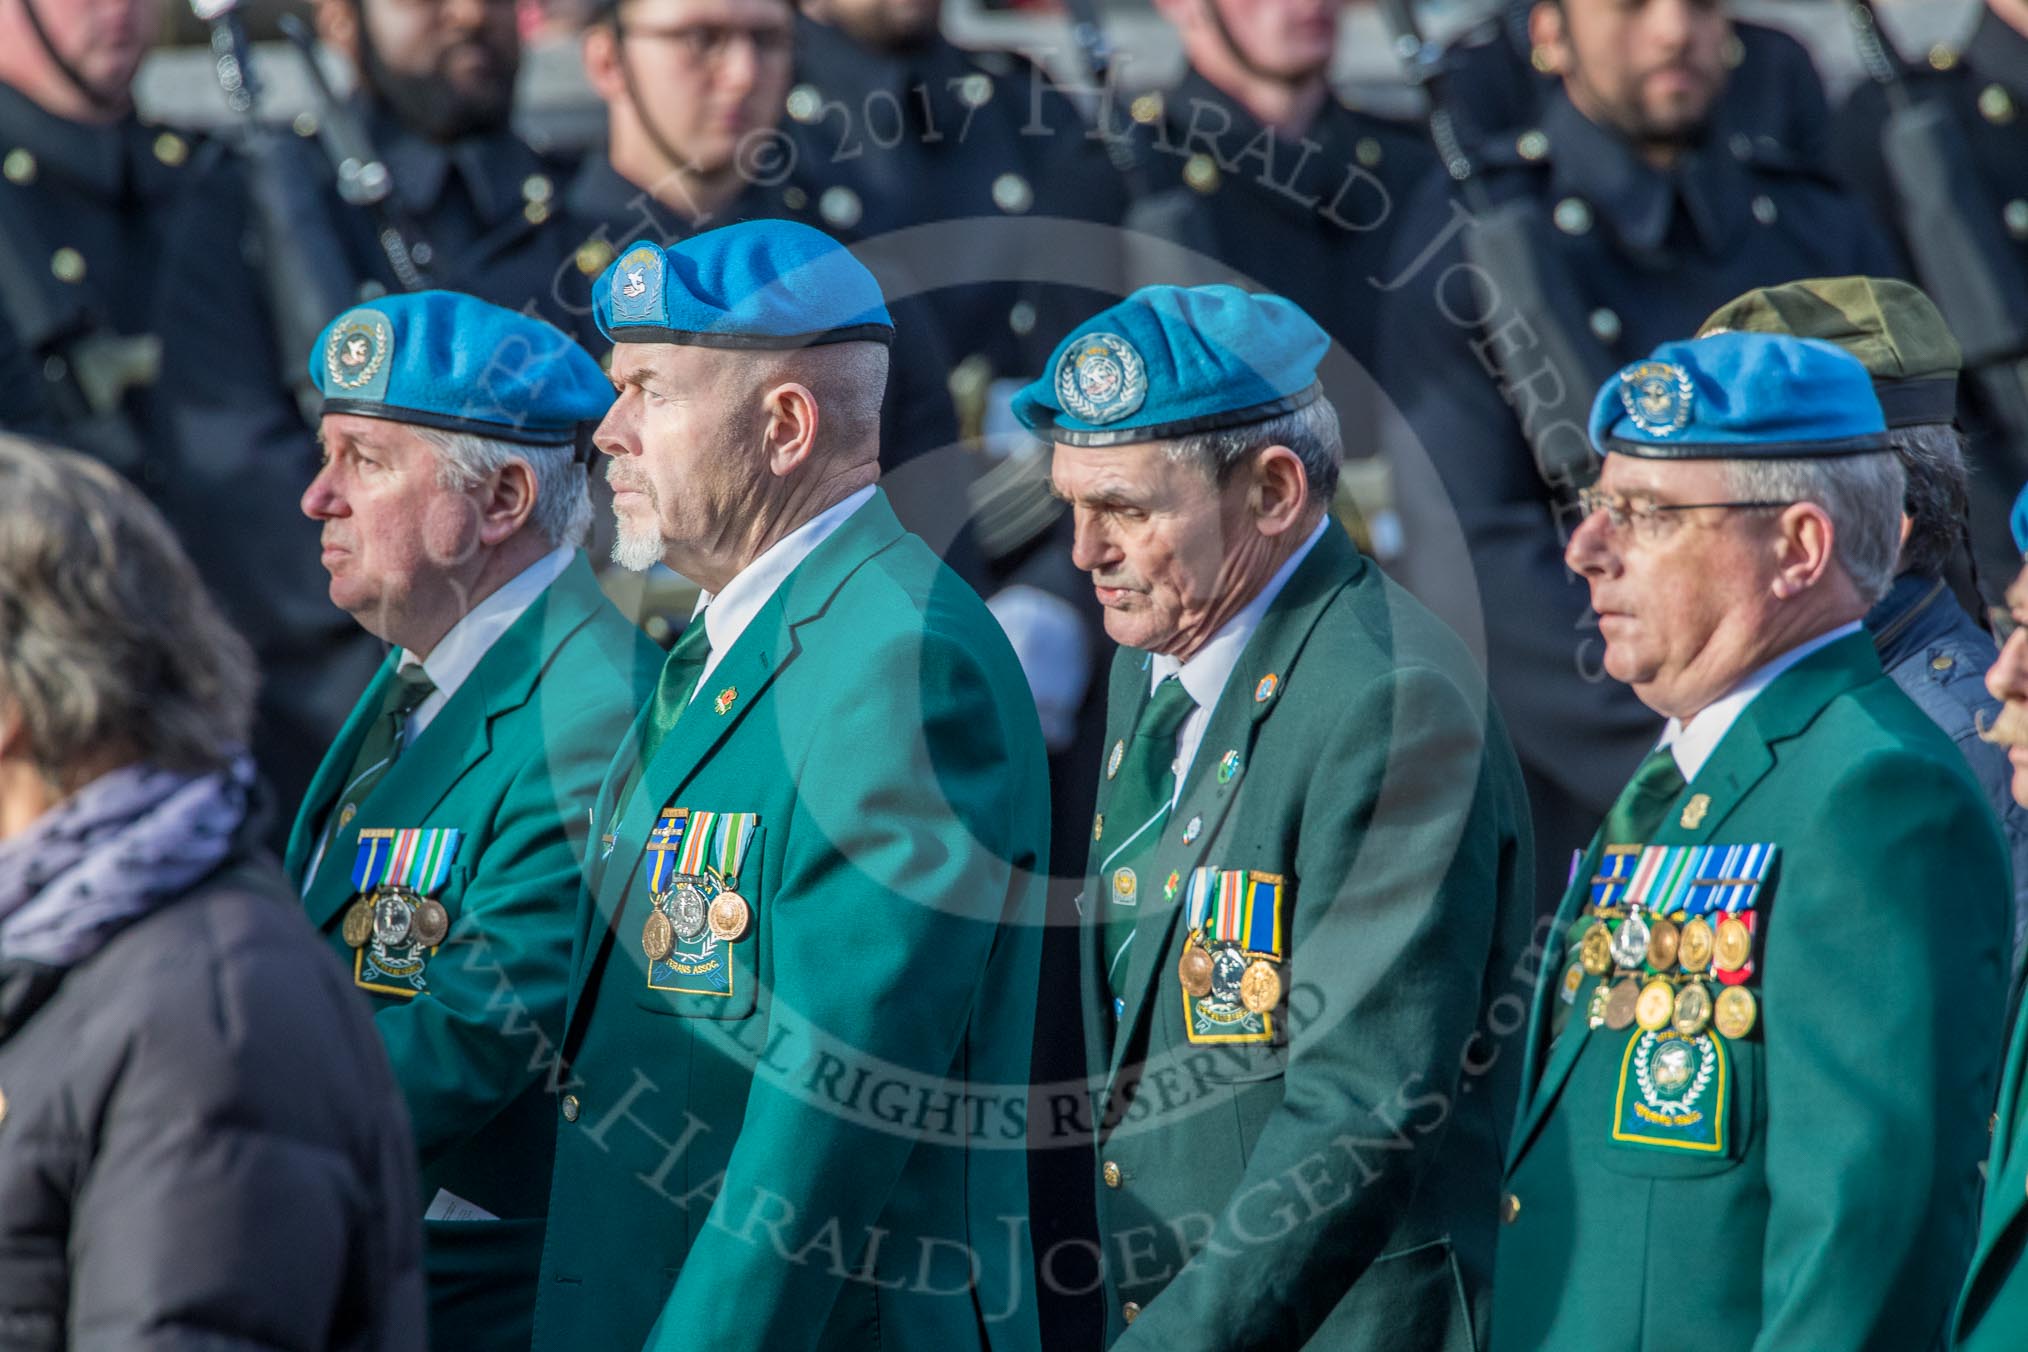 Irish United Nations Veterans Association  (Group F18, 14 members)  during the Royal British Legion March Past on Remembrance Sunday at the Cenotaph, Whitehall, Westminster, London, 11 November 2018, 11:53.